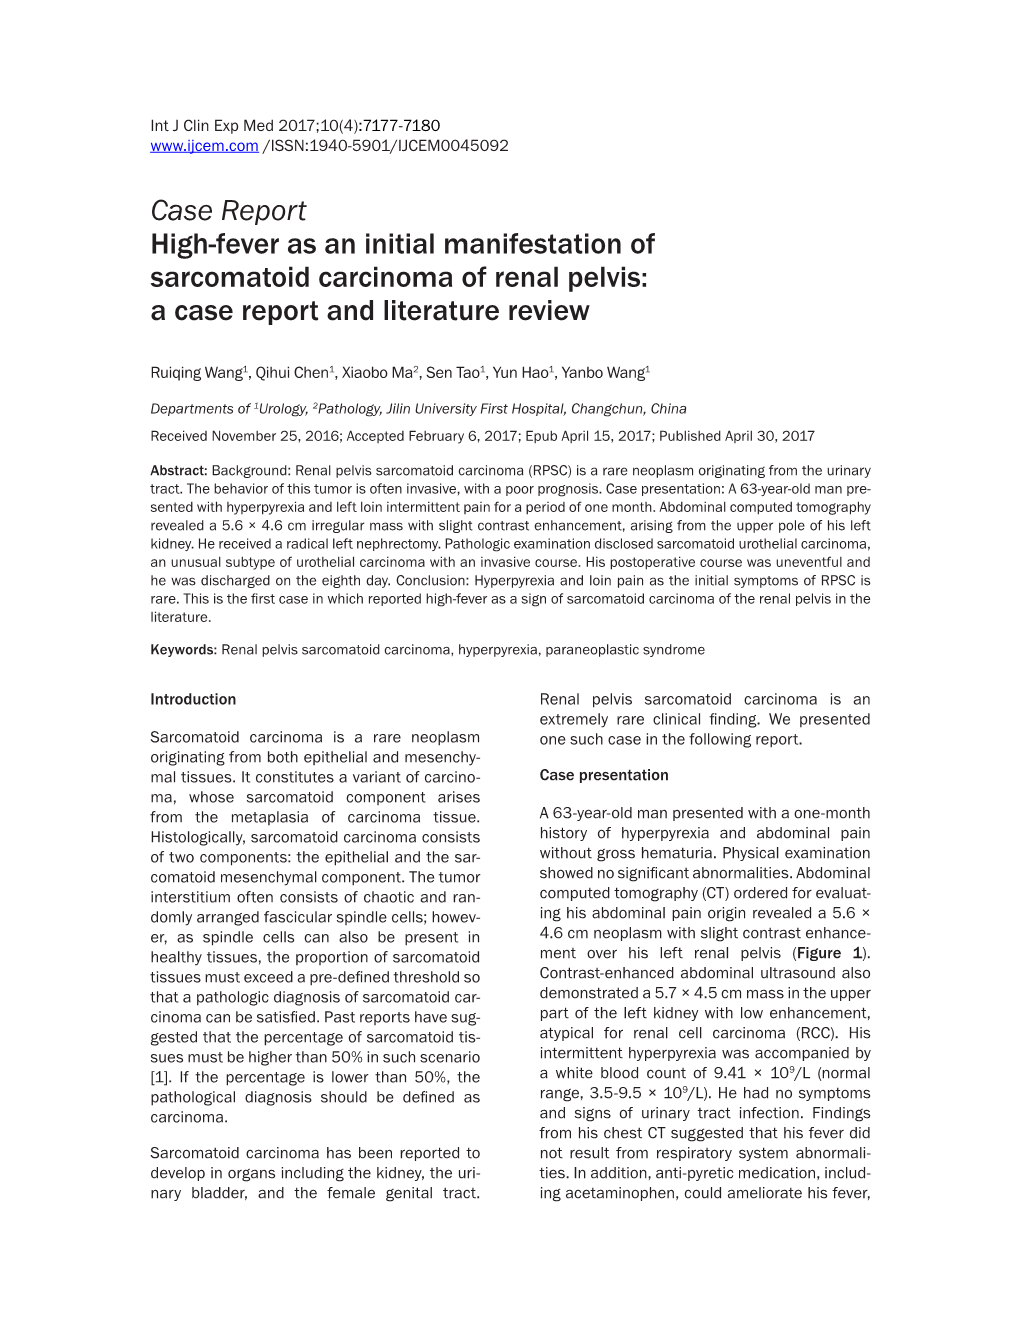 Case Report High-Fever As an Initial Manifestation of Sarcomatoid Carcinoma of Renal Pelvis: a Case Report and Literature Review